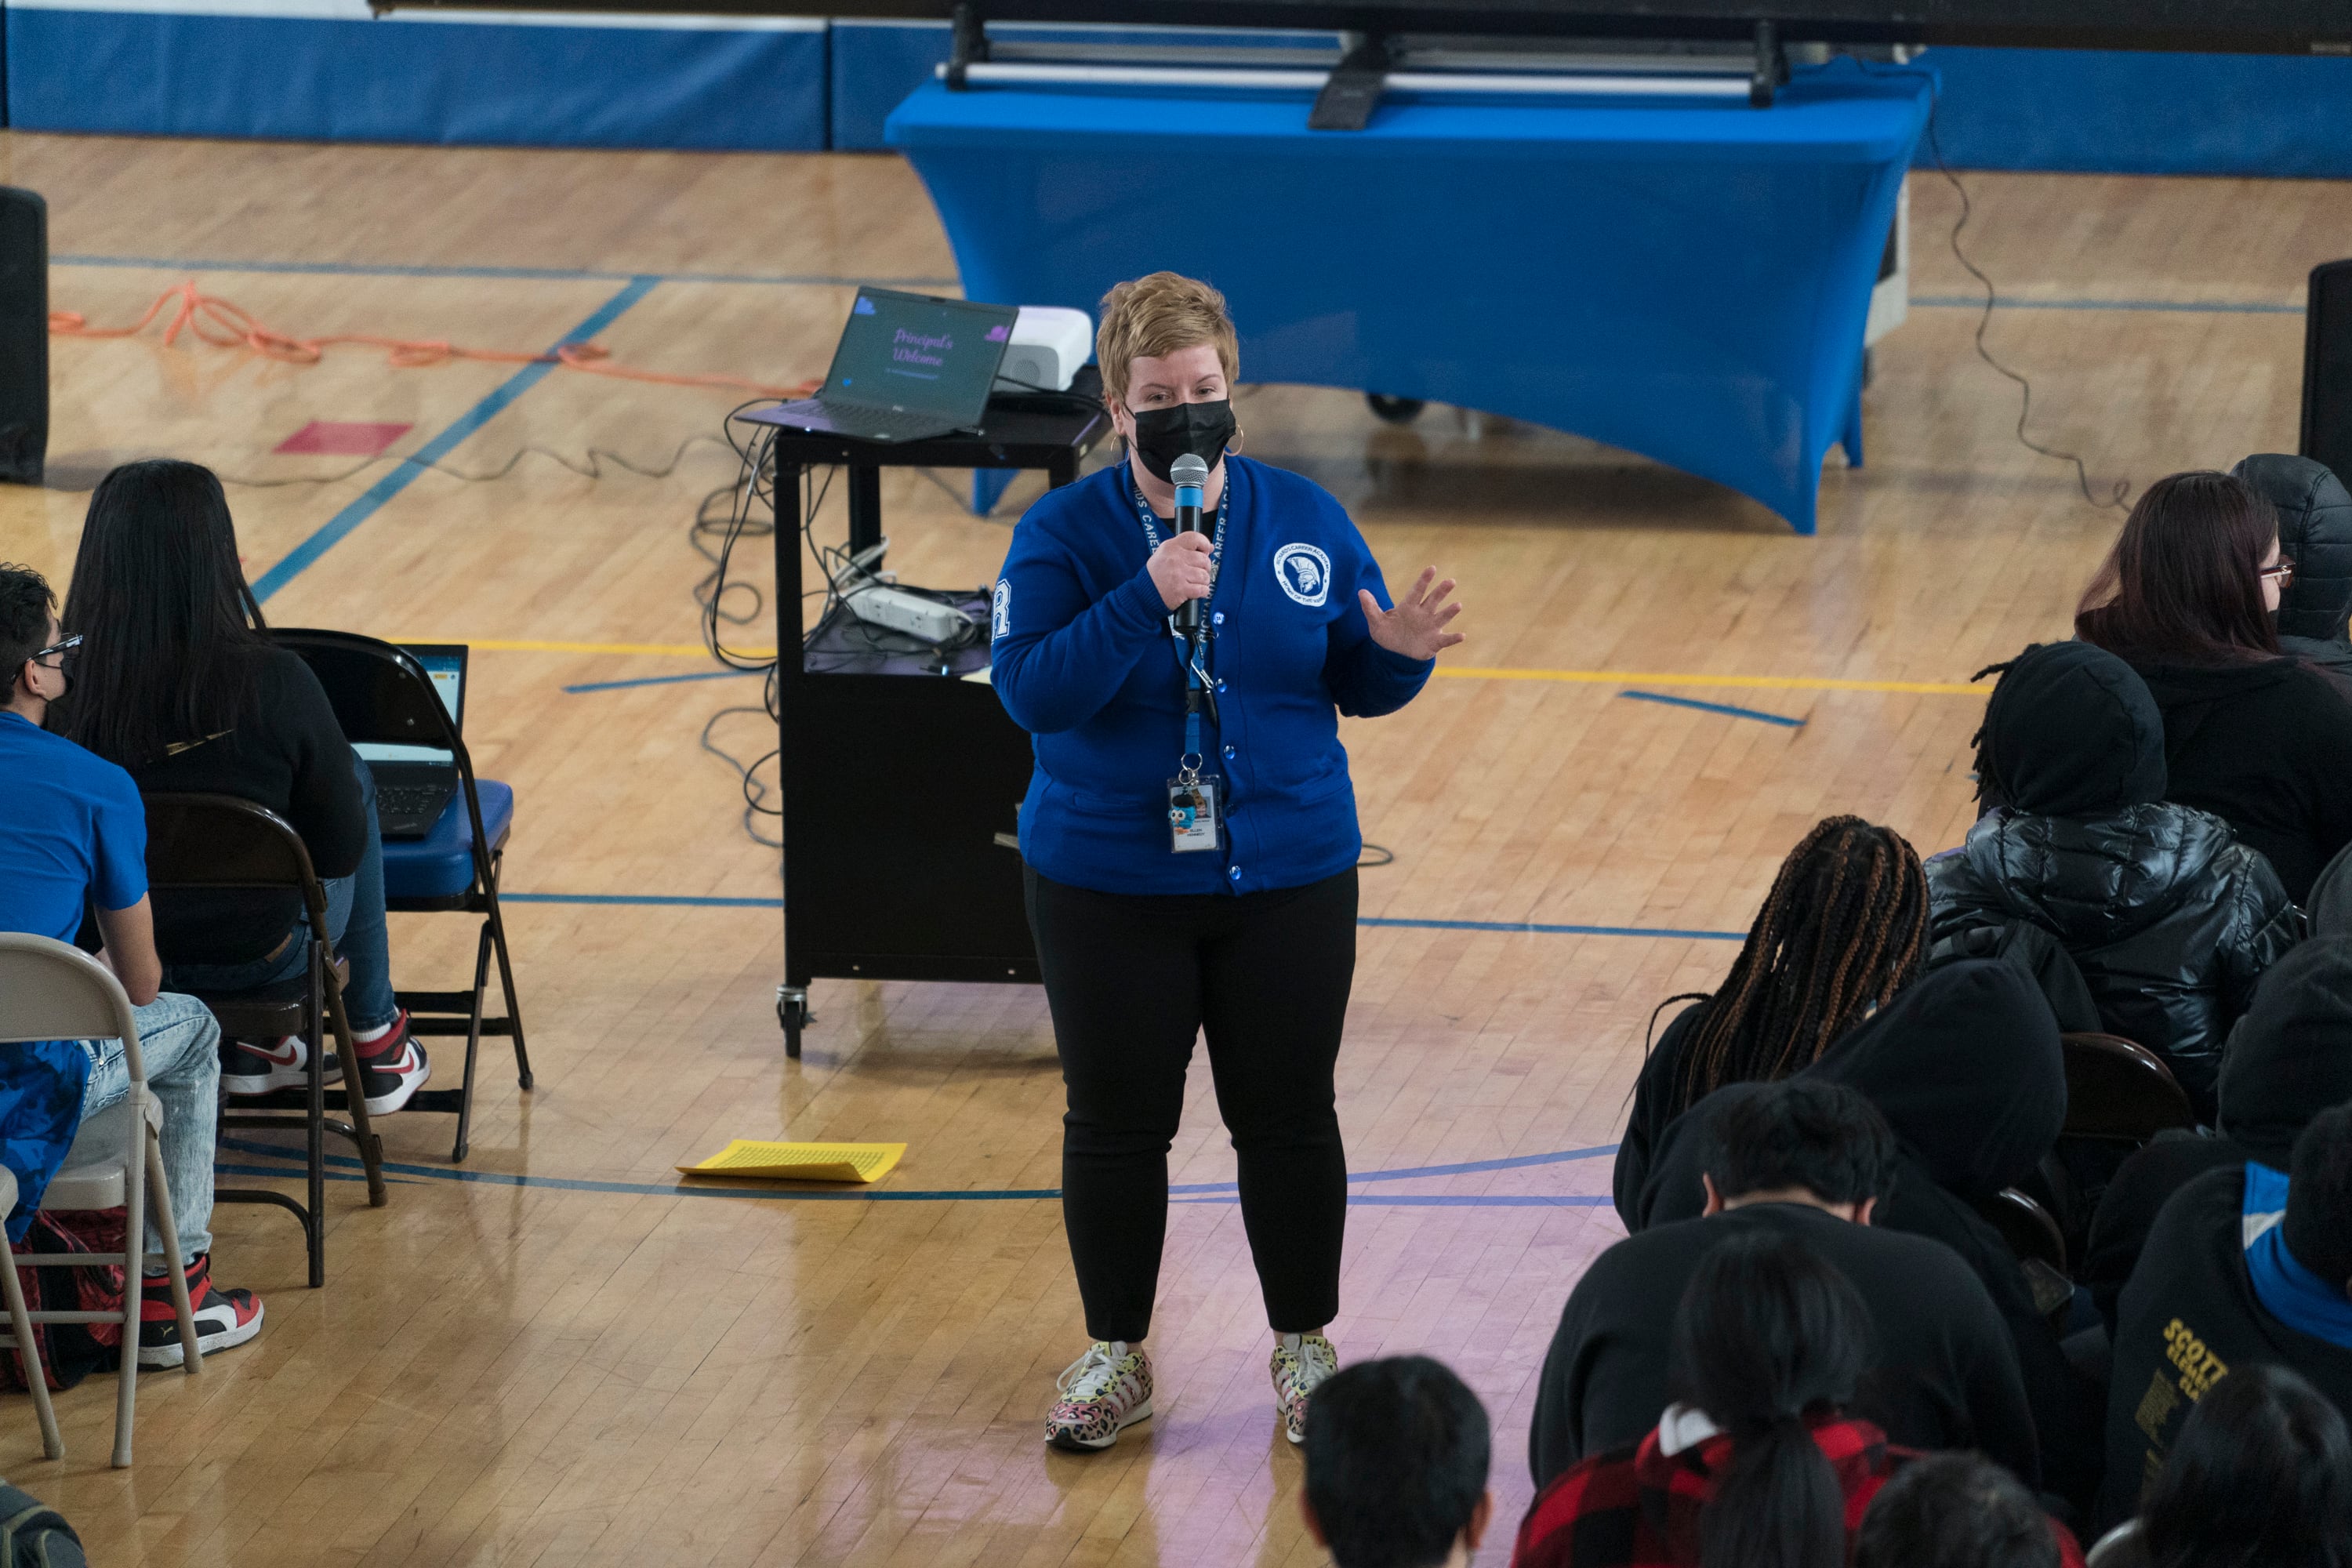 A school principal wearing a blue top and black pants addresses her students during an assembly in a high school gymnasium.